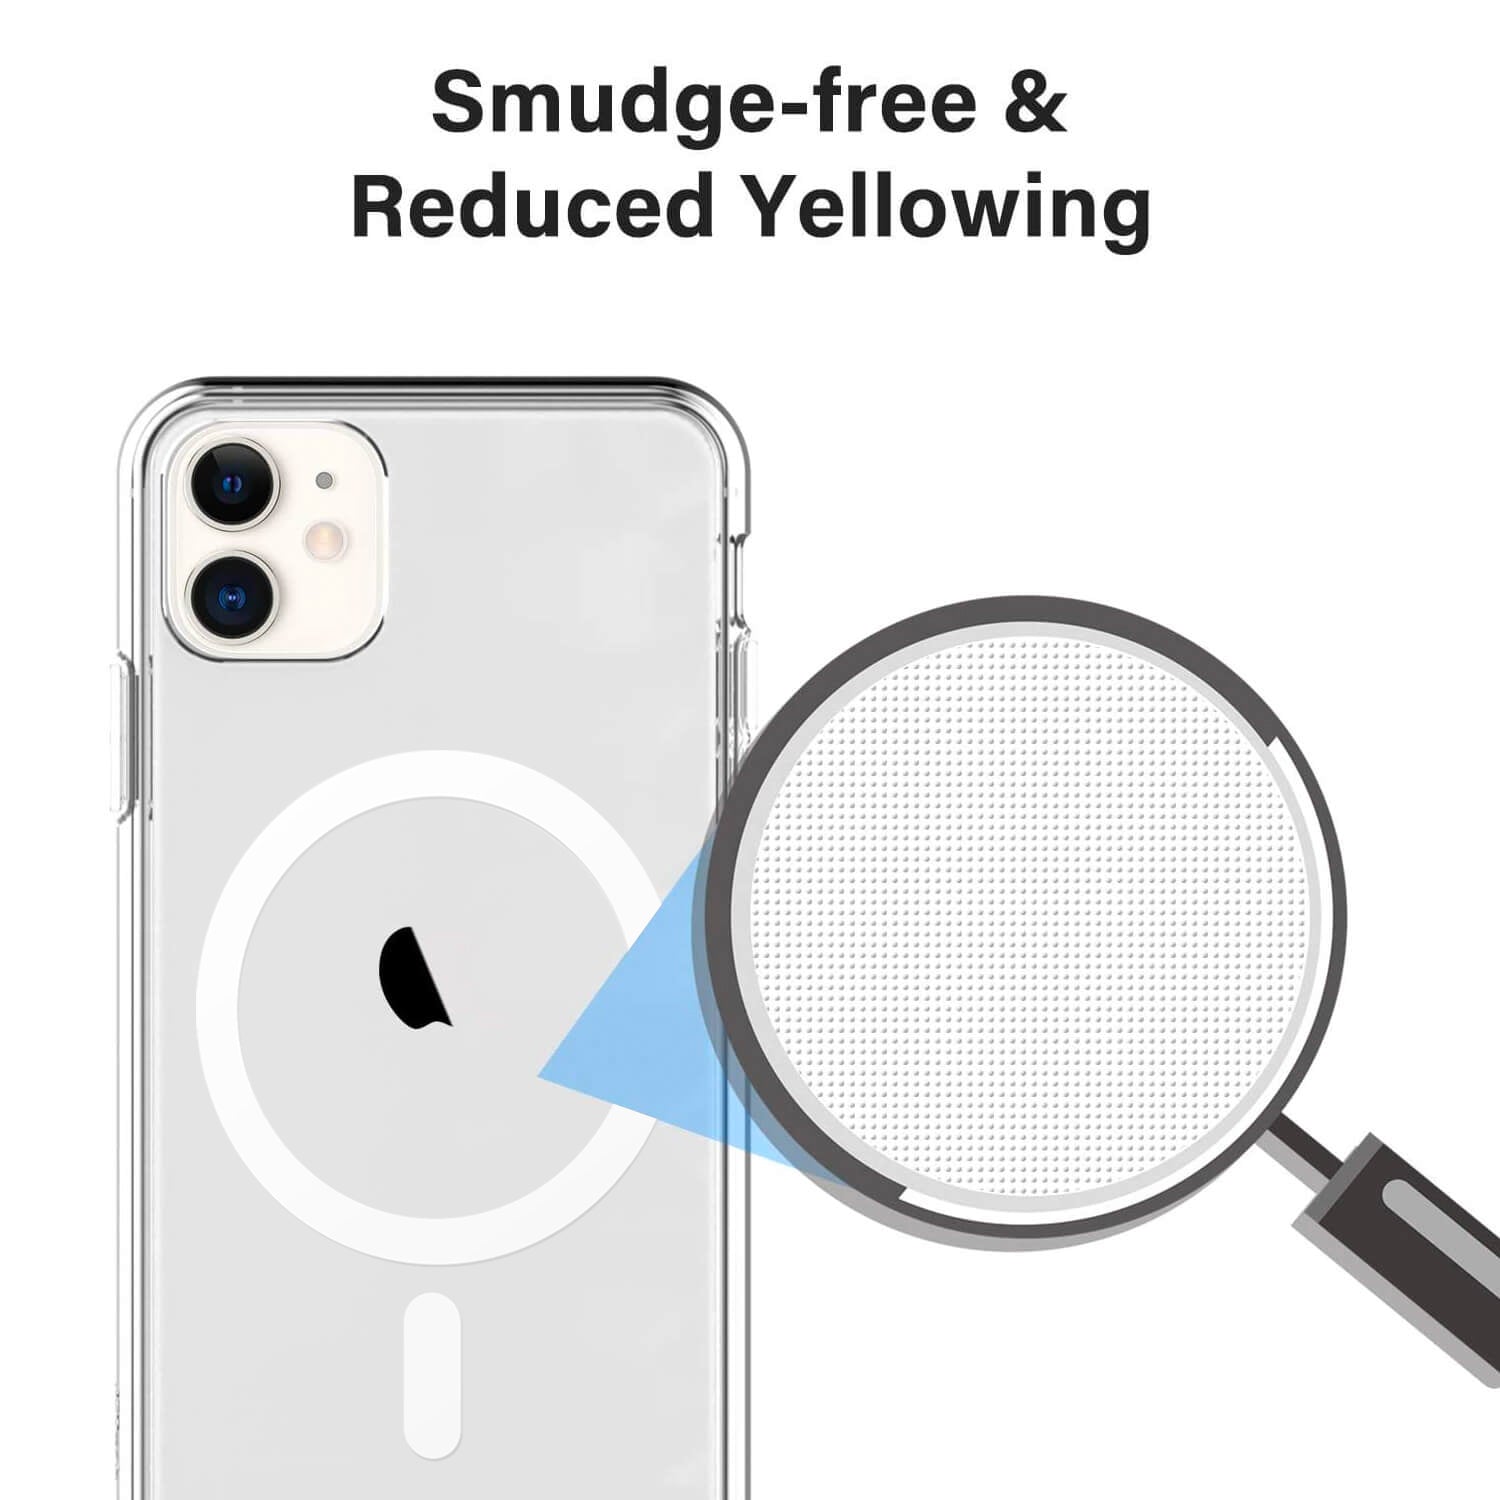 Tough On iPhone XR Case Tough Clear with Magsafe